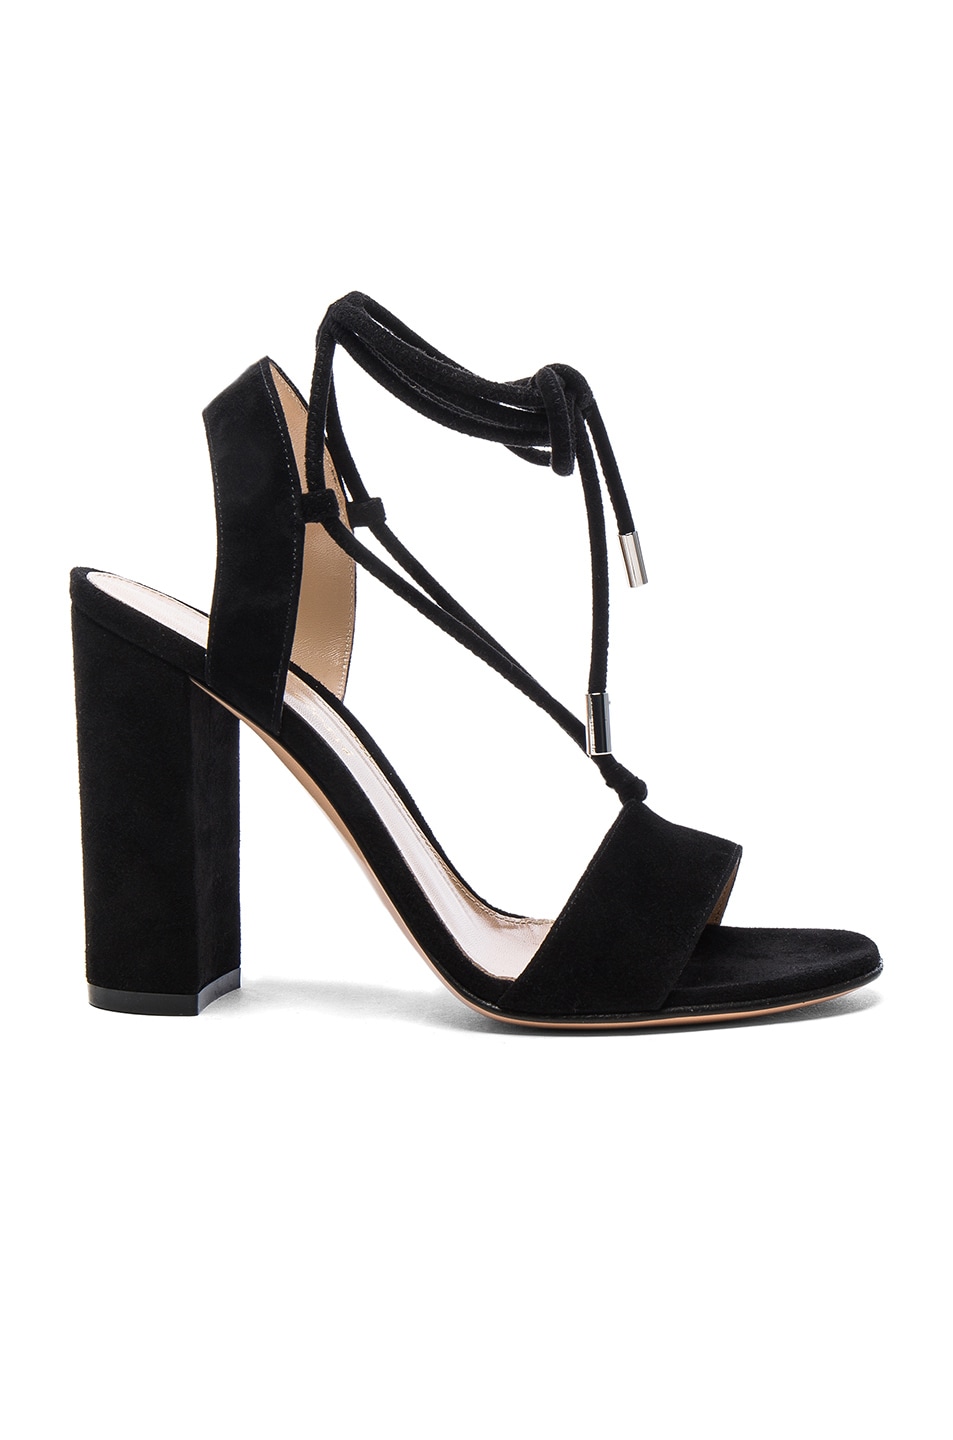 Image 1 of Gianvito Rossi Suede Lace Up Heels in Black